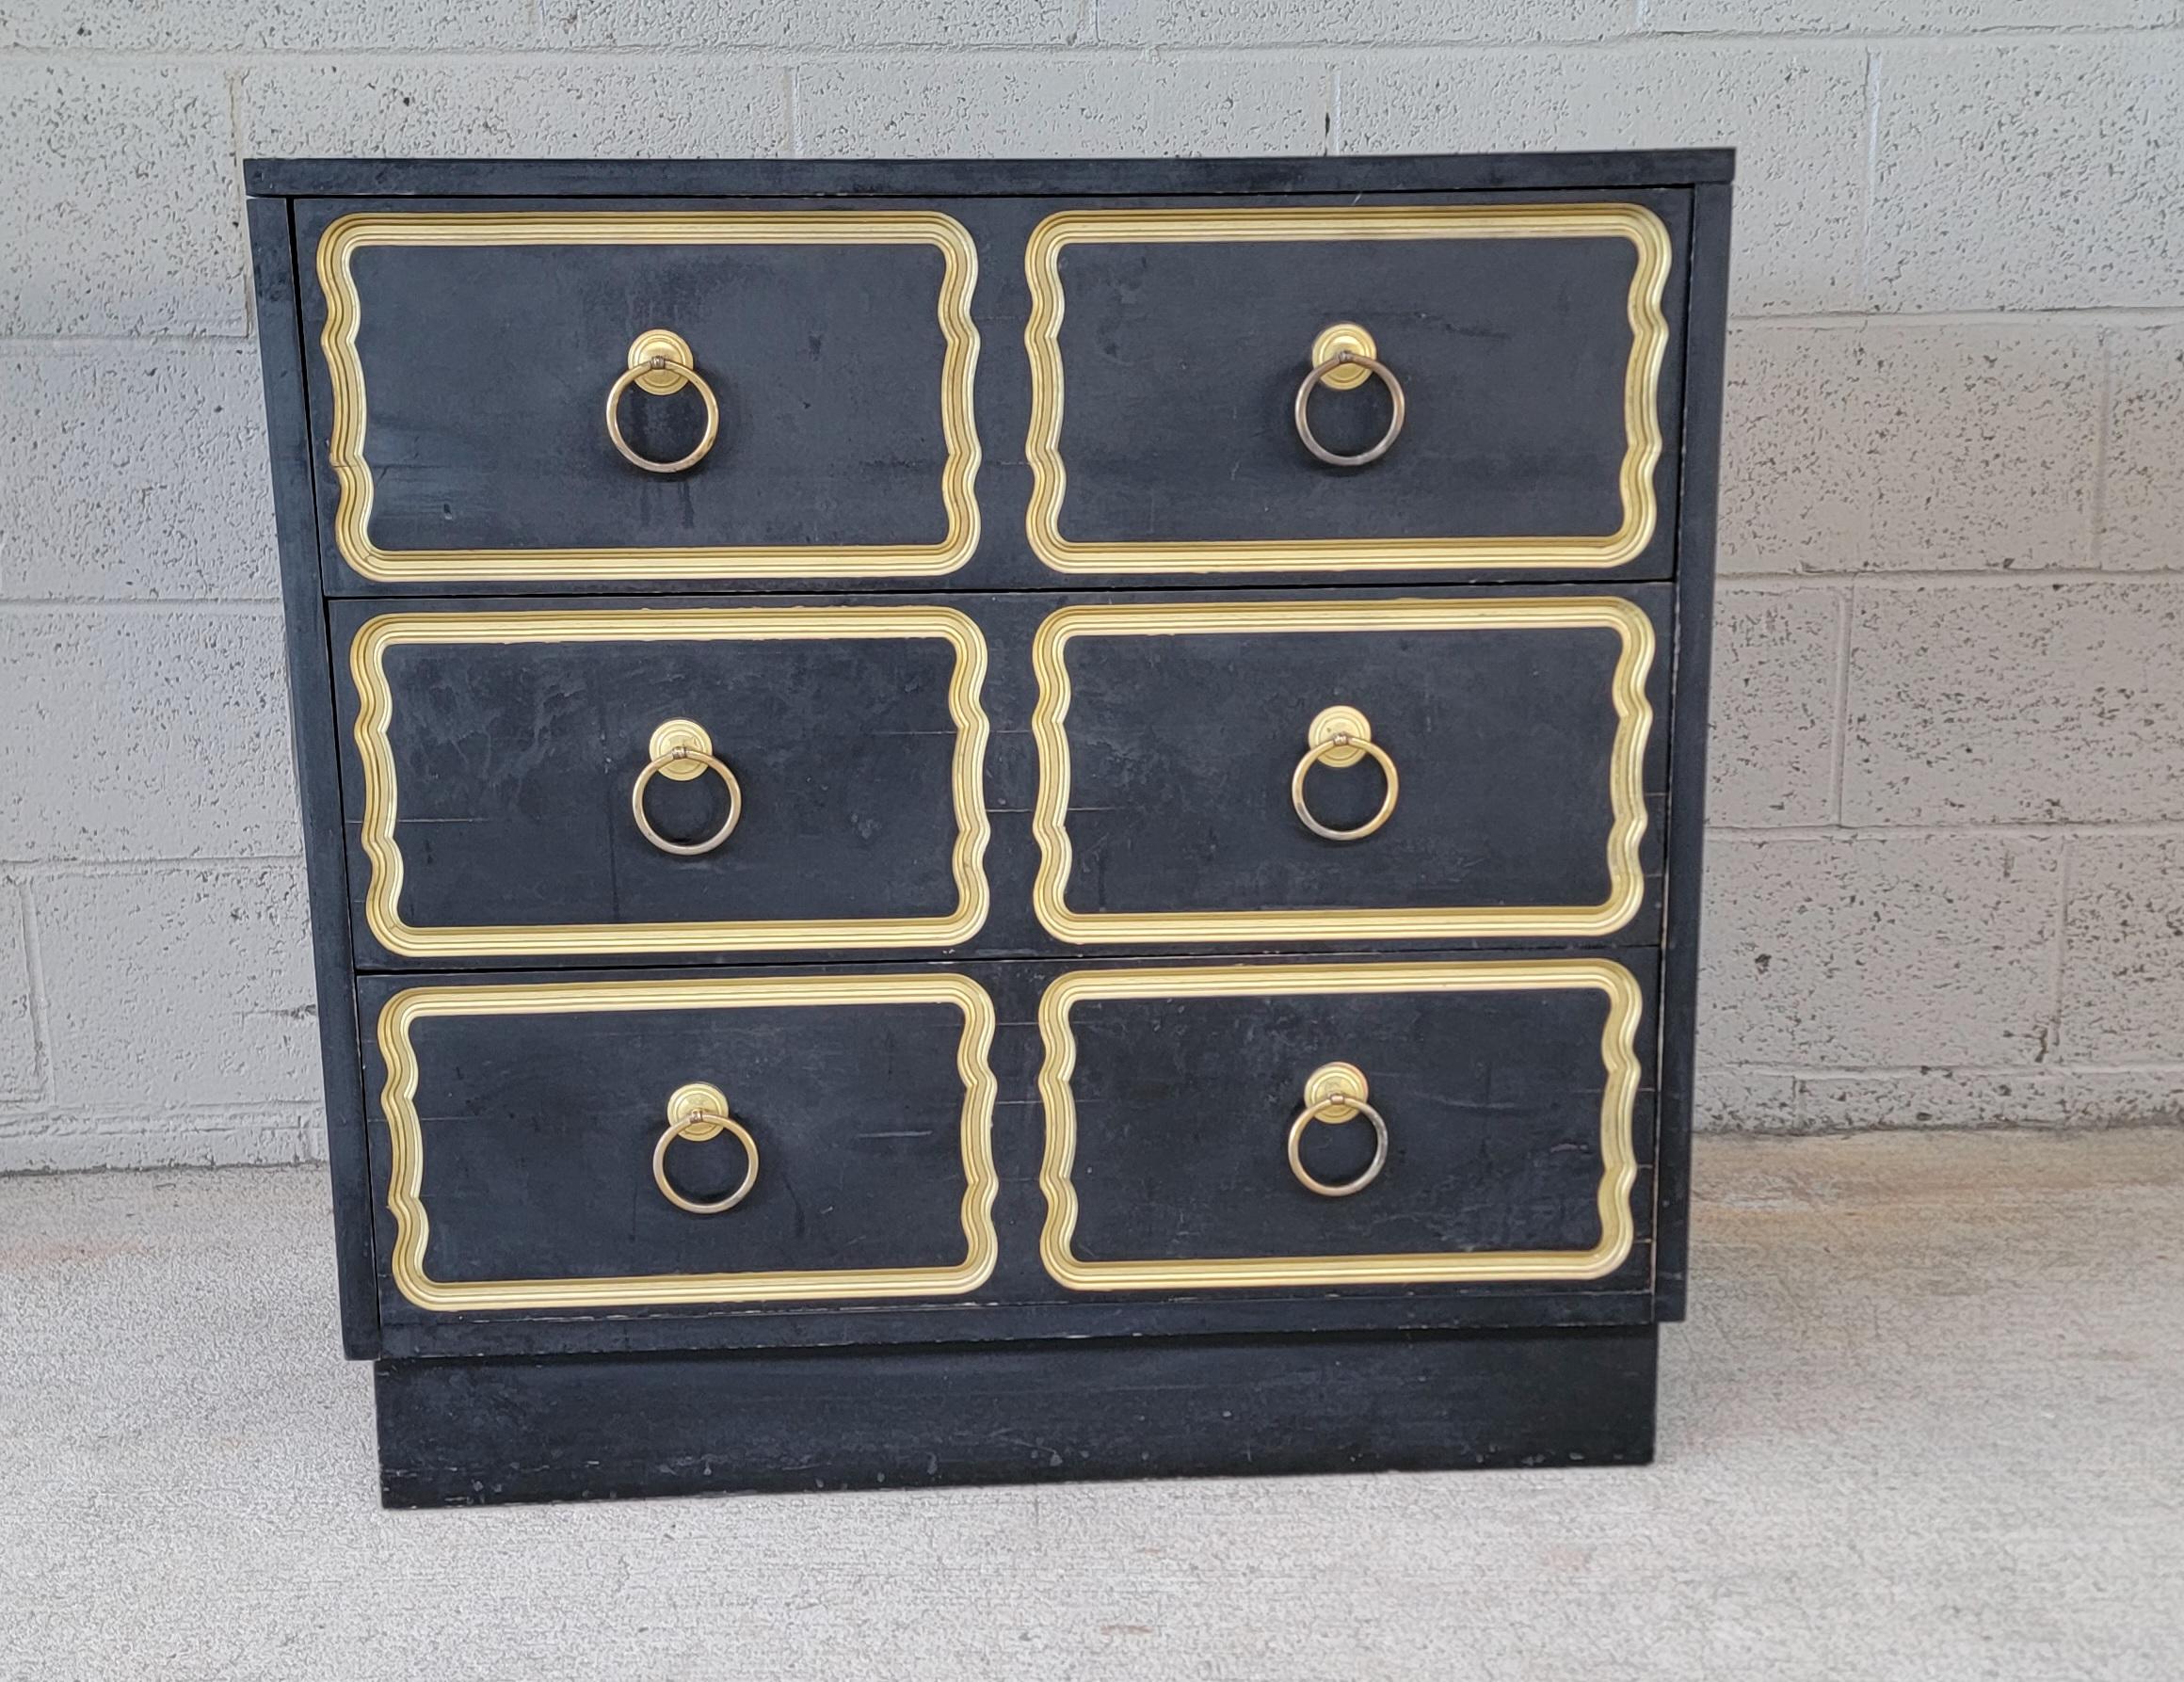 Chest of drawers attributed to Dorothy Draper. Three drawers with dovetail construction. Original black and gold painted finish. Original hardware. Wear from age and use. 